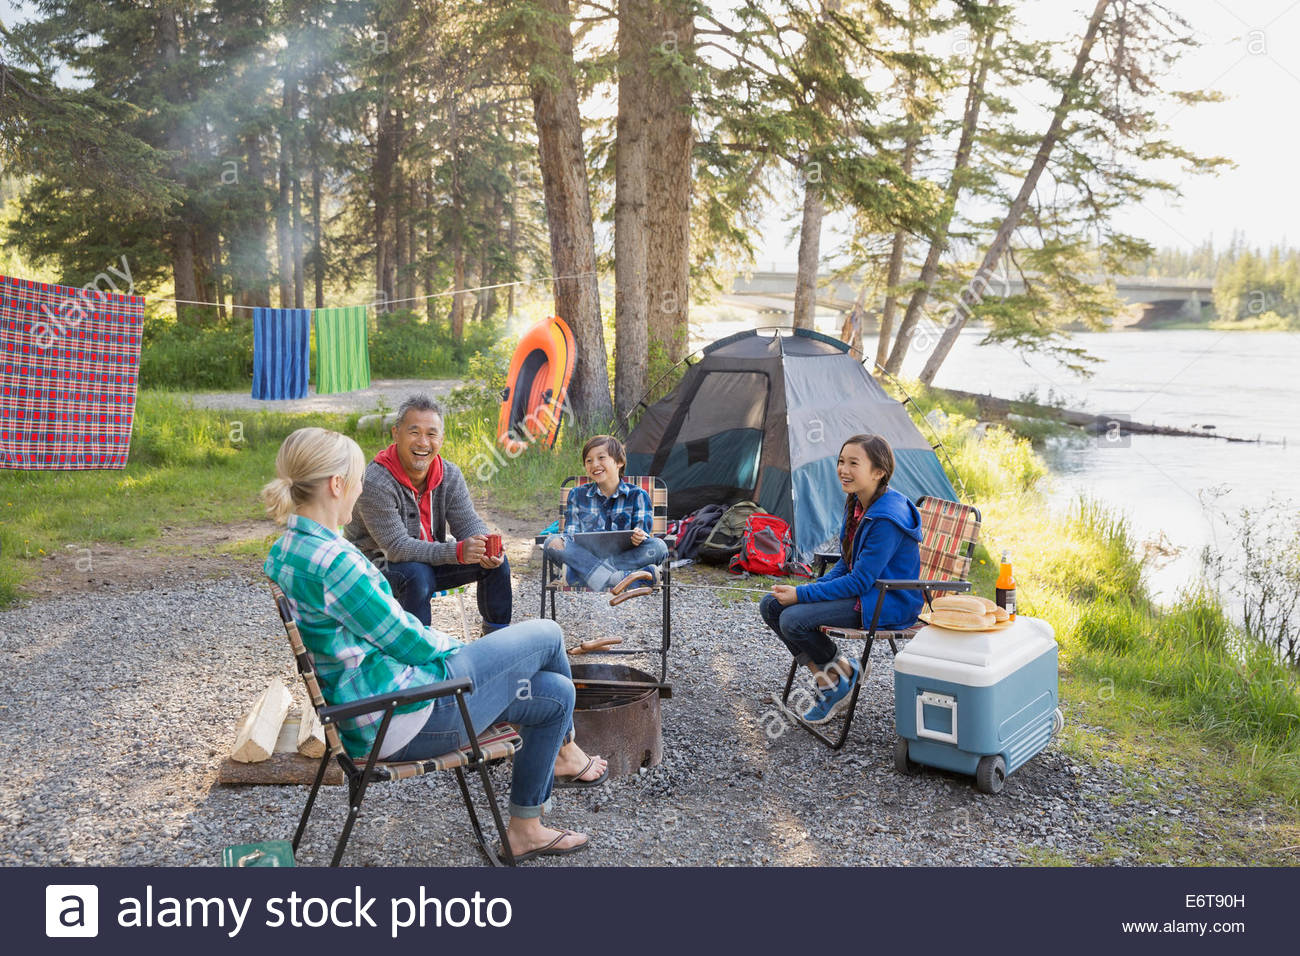 Family relaxing together around campfire Stock Photo